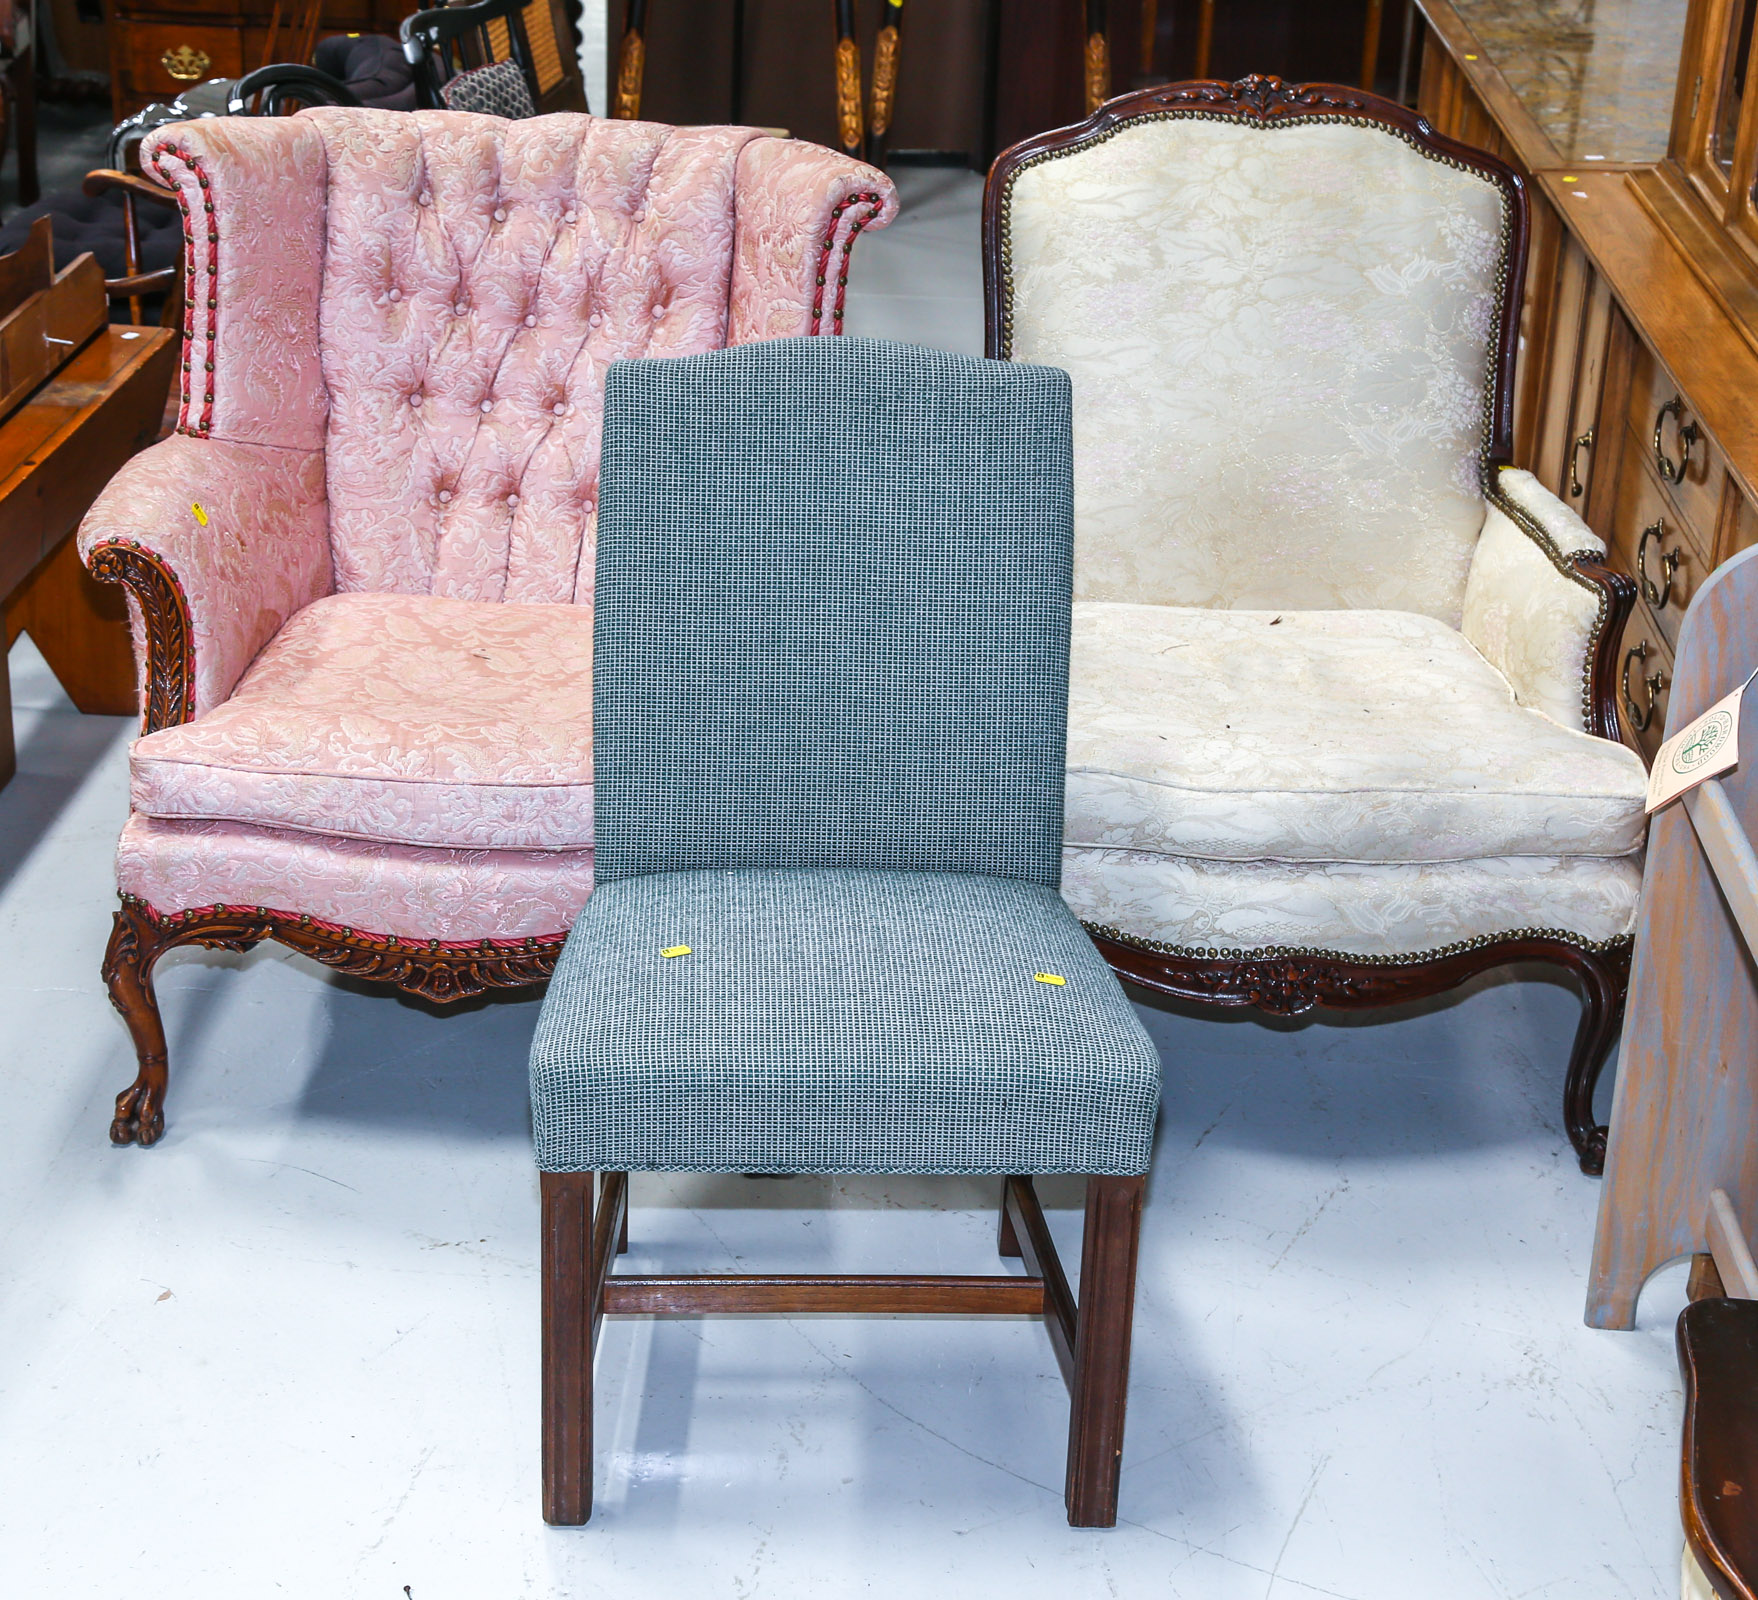 THREE UPHOLSTERED PARLOR CHAIRS 2e968e